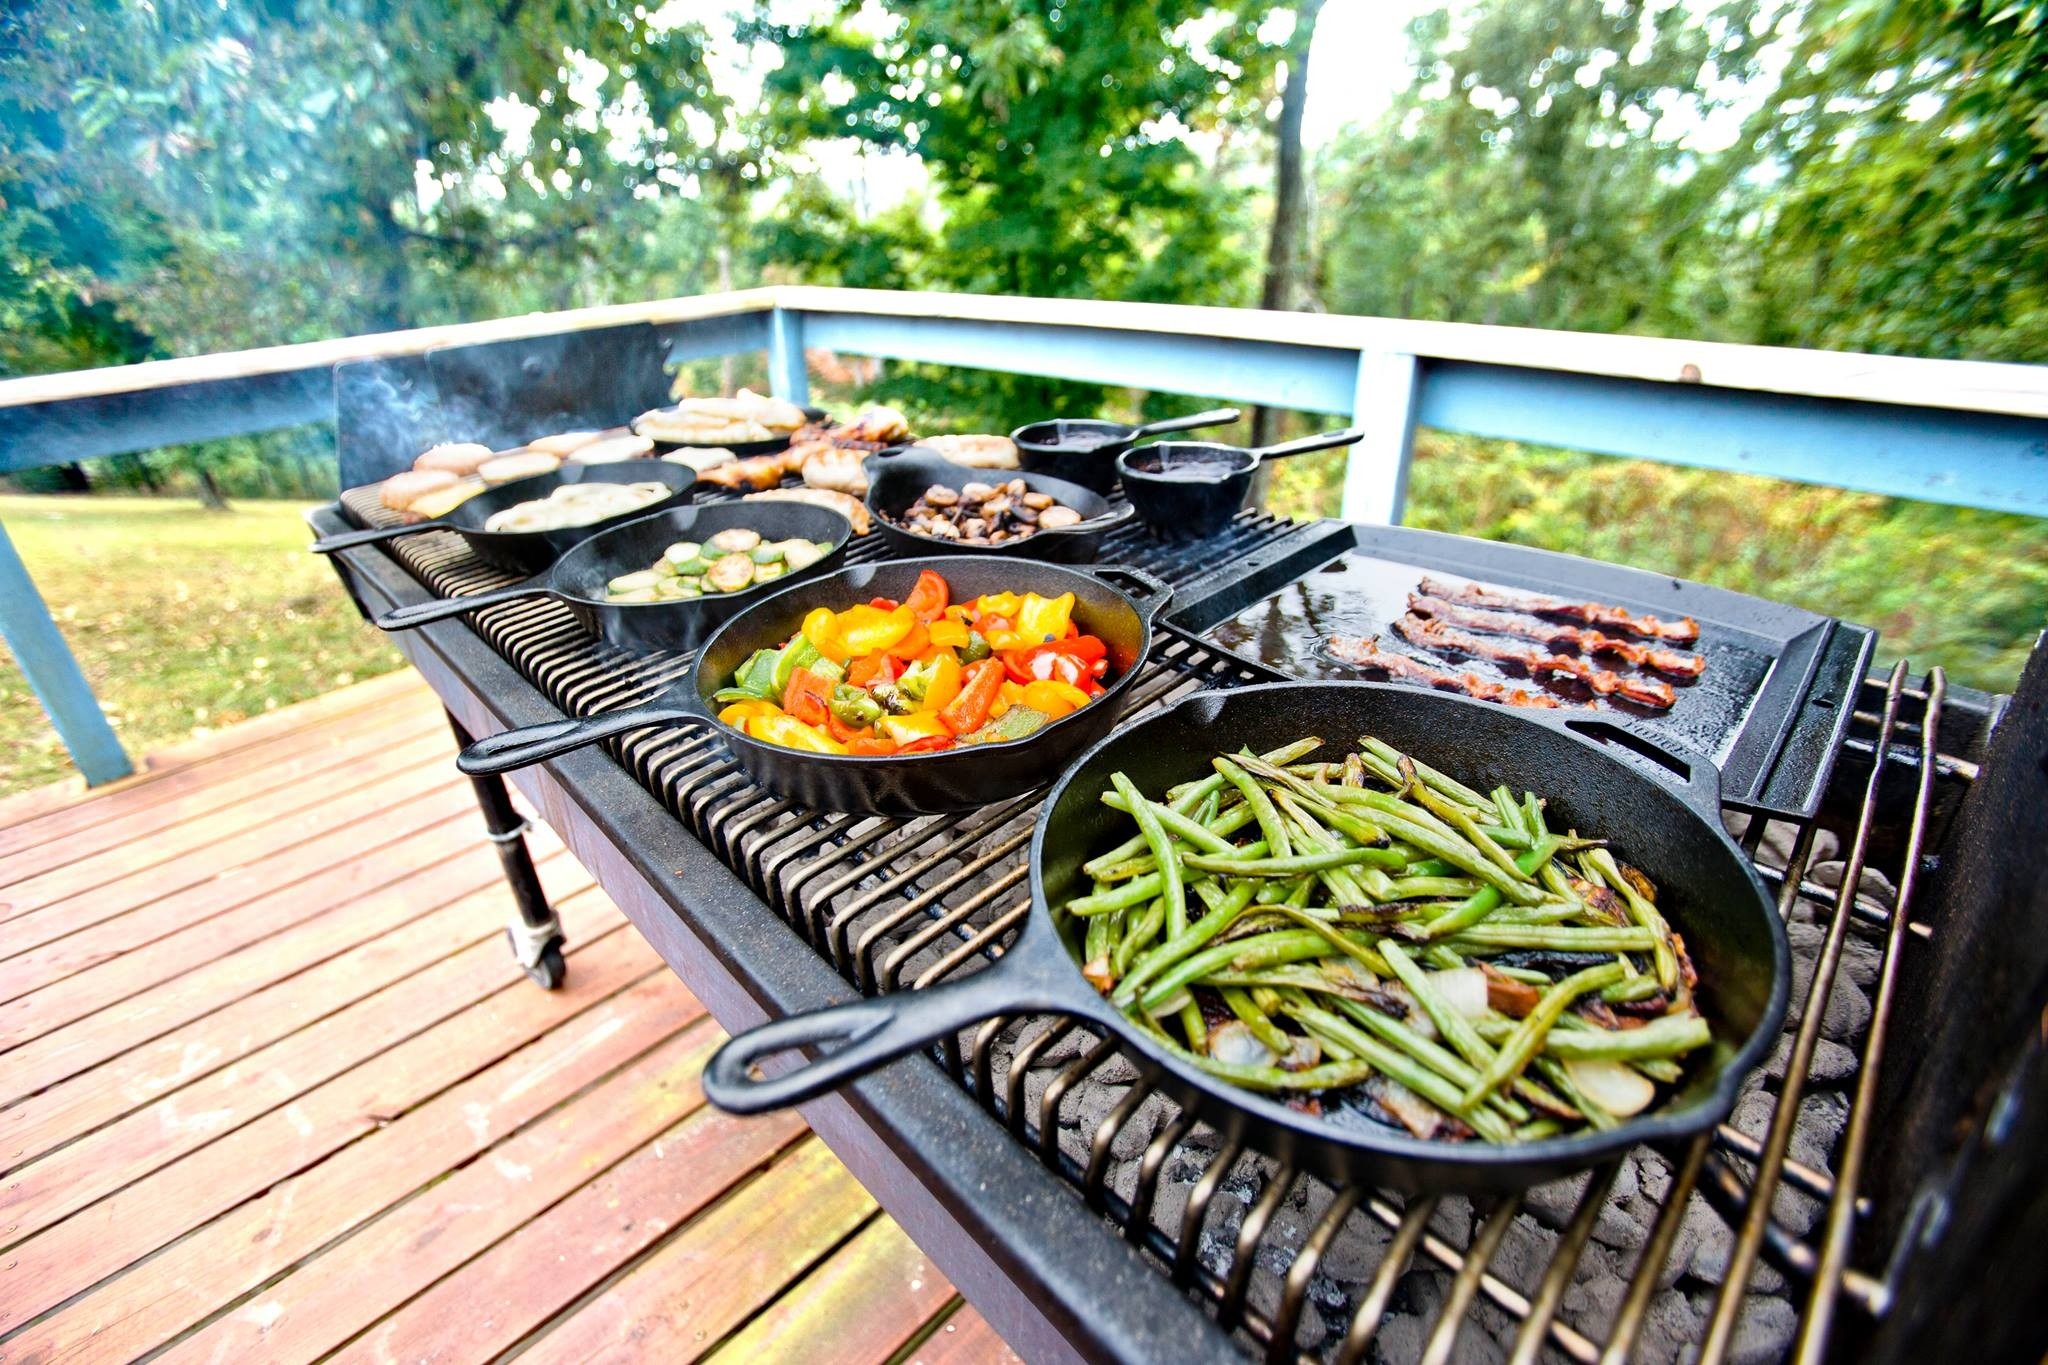 Grilling with cast iron in a firepit